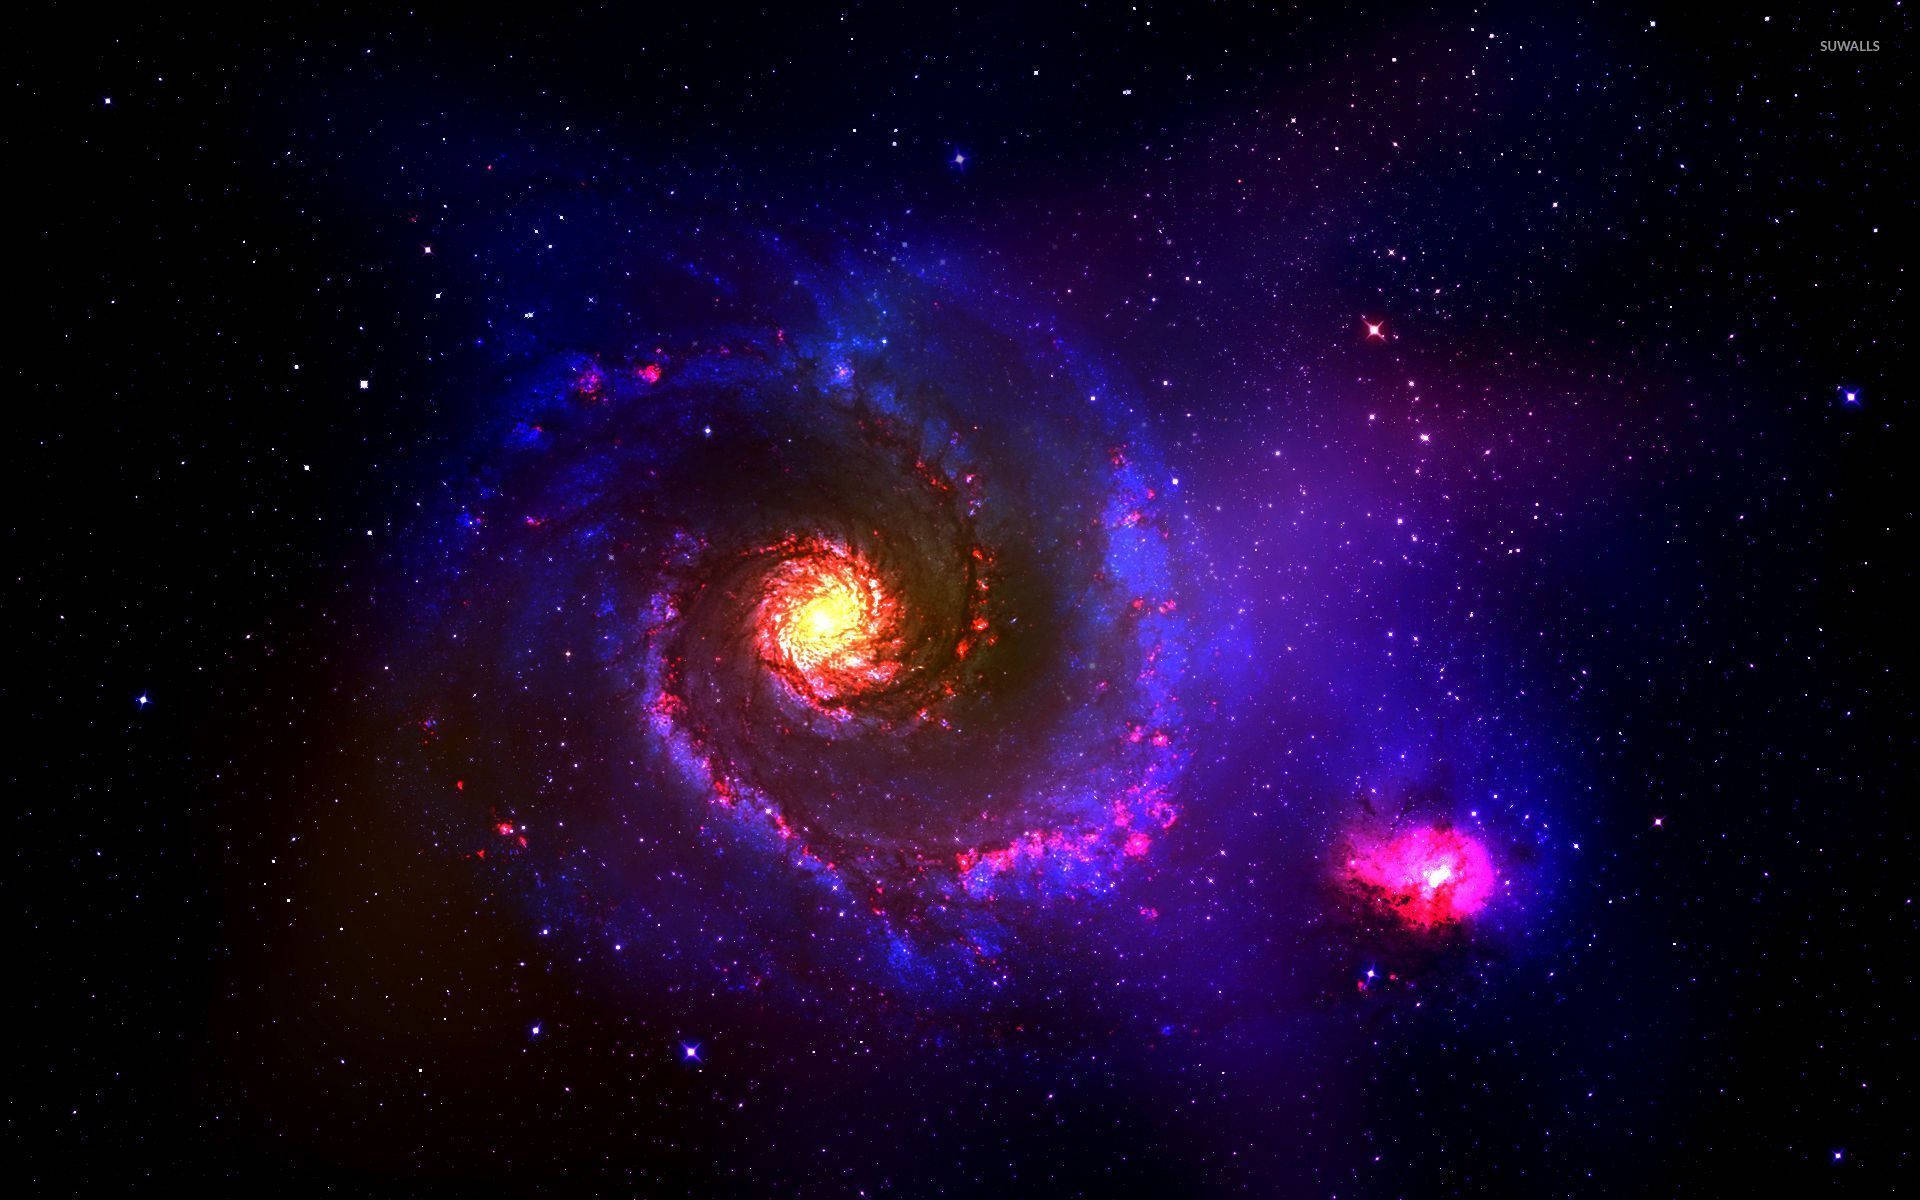 Experience a celestial journey into a swirling blue and purple galaxy Wallpaper